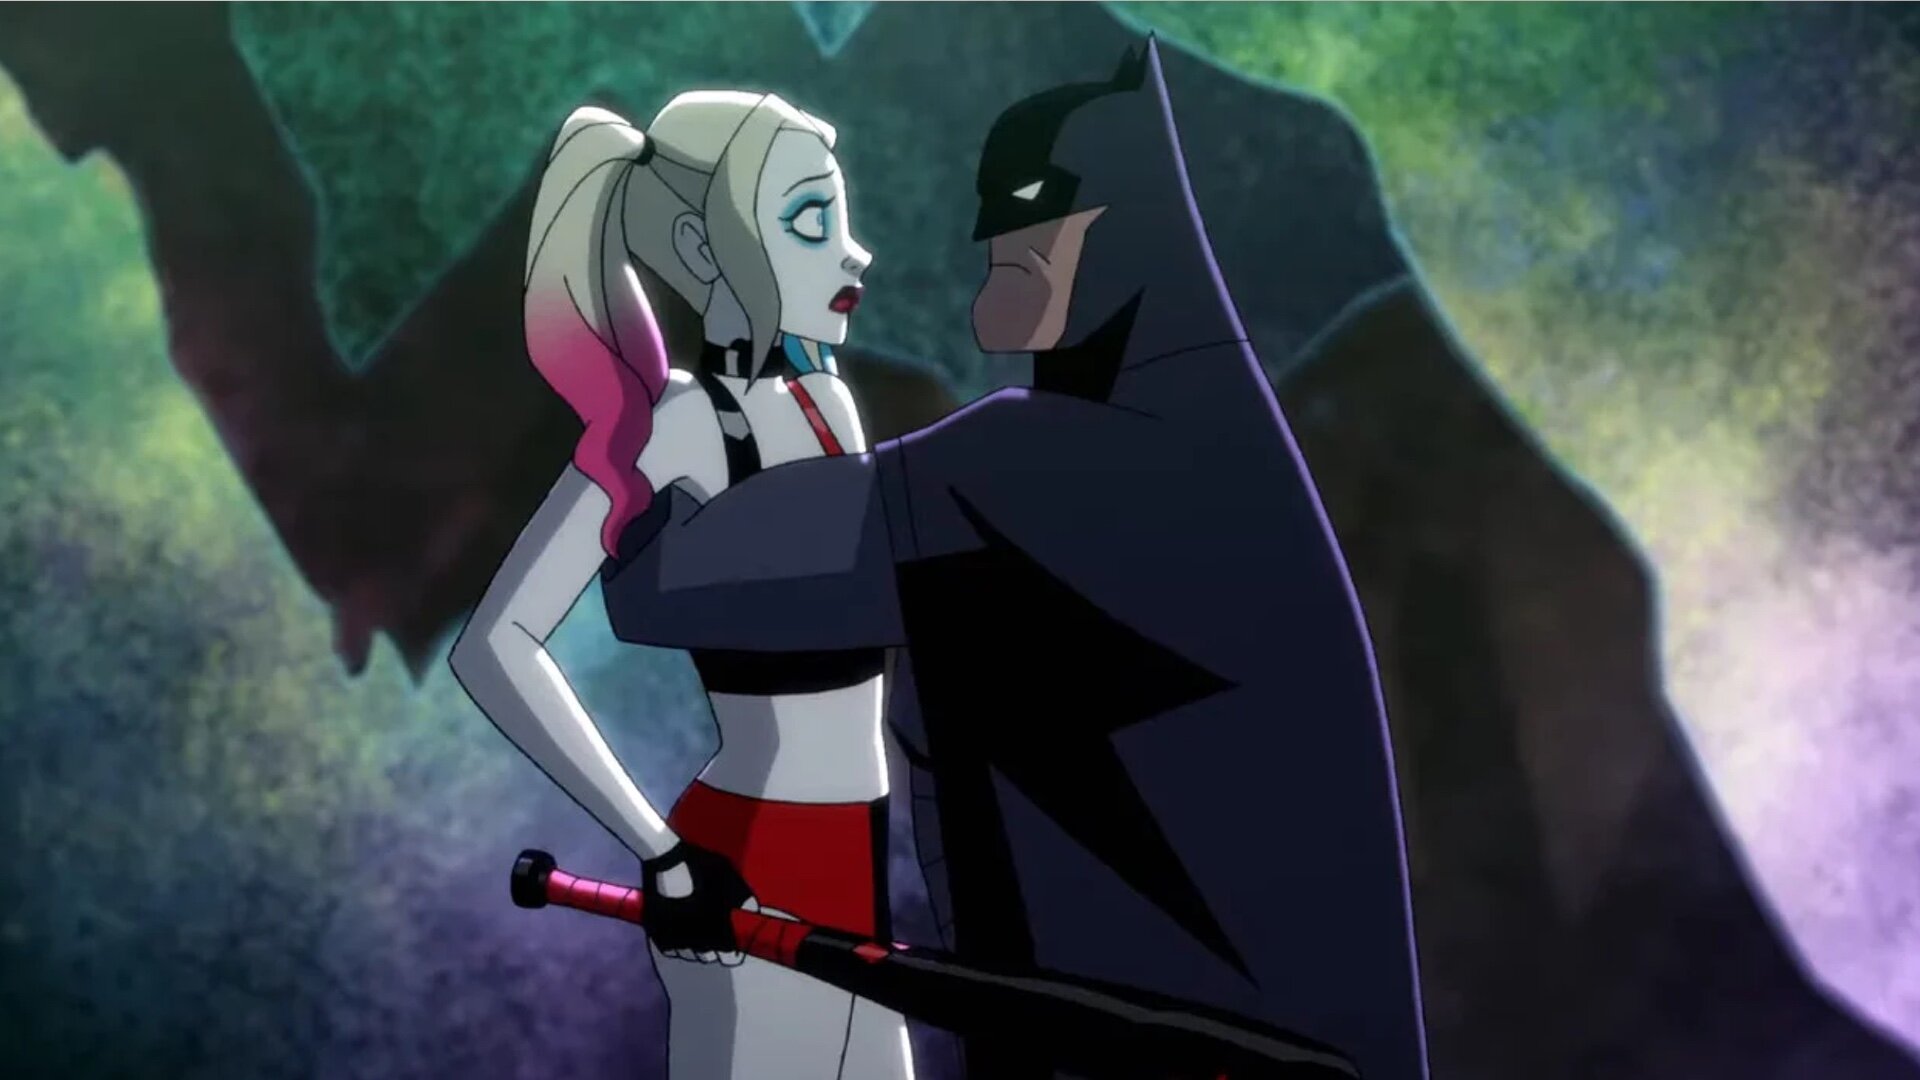 billye nelson recommends harley quinn cartoon sexy pic